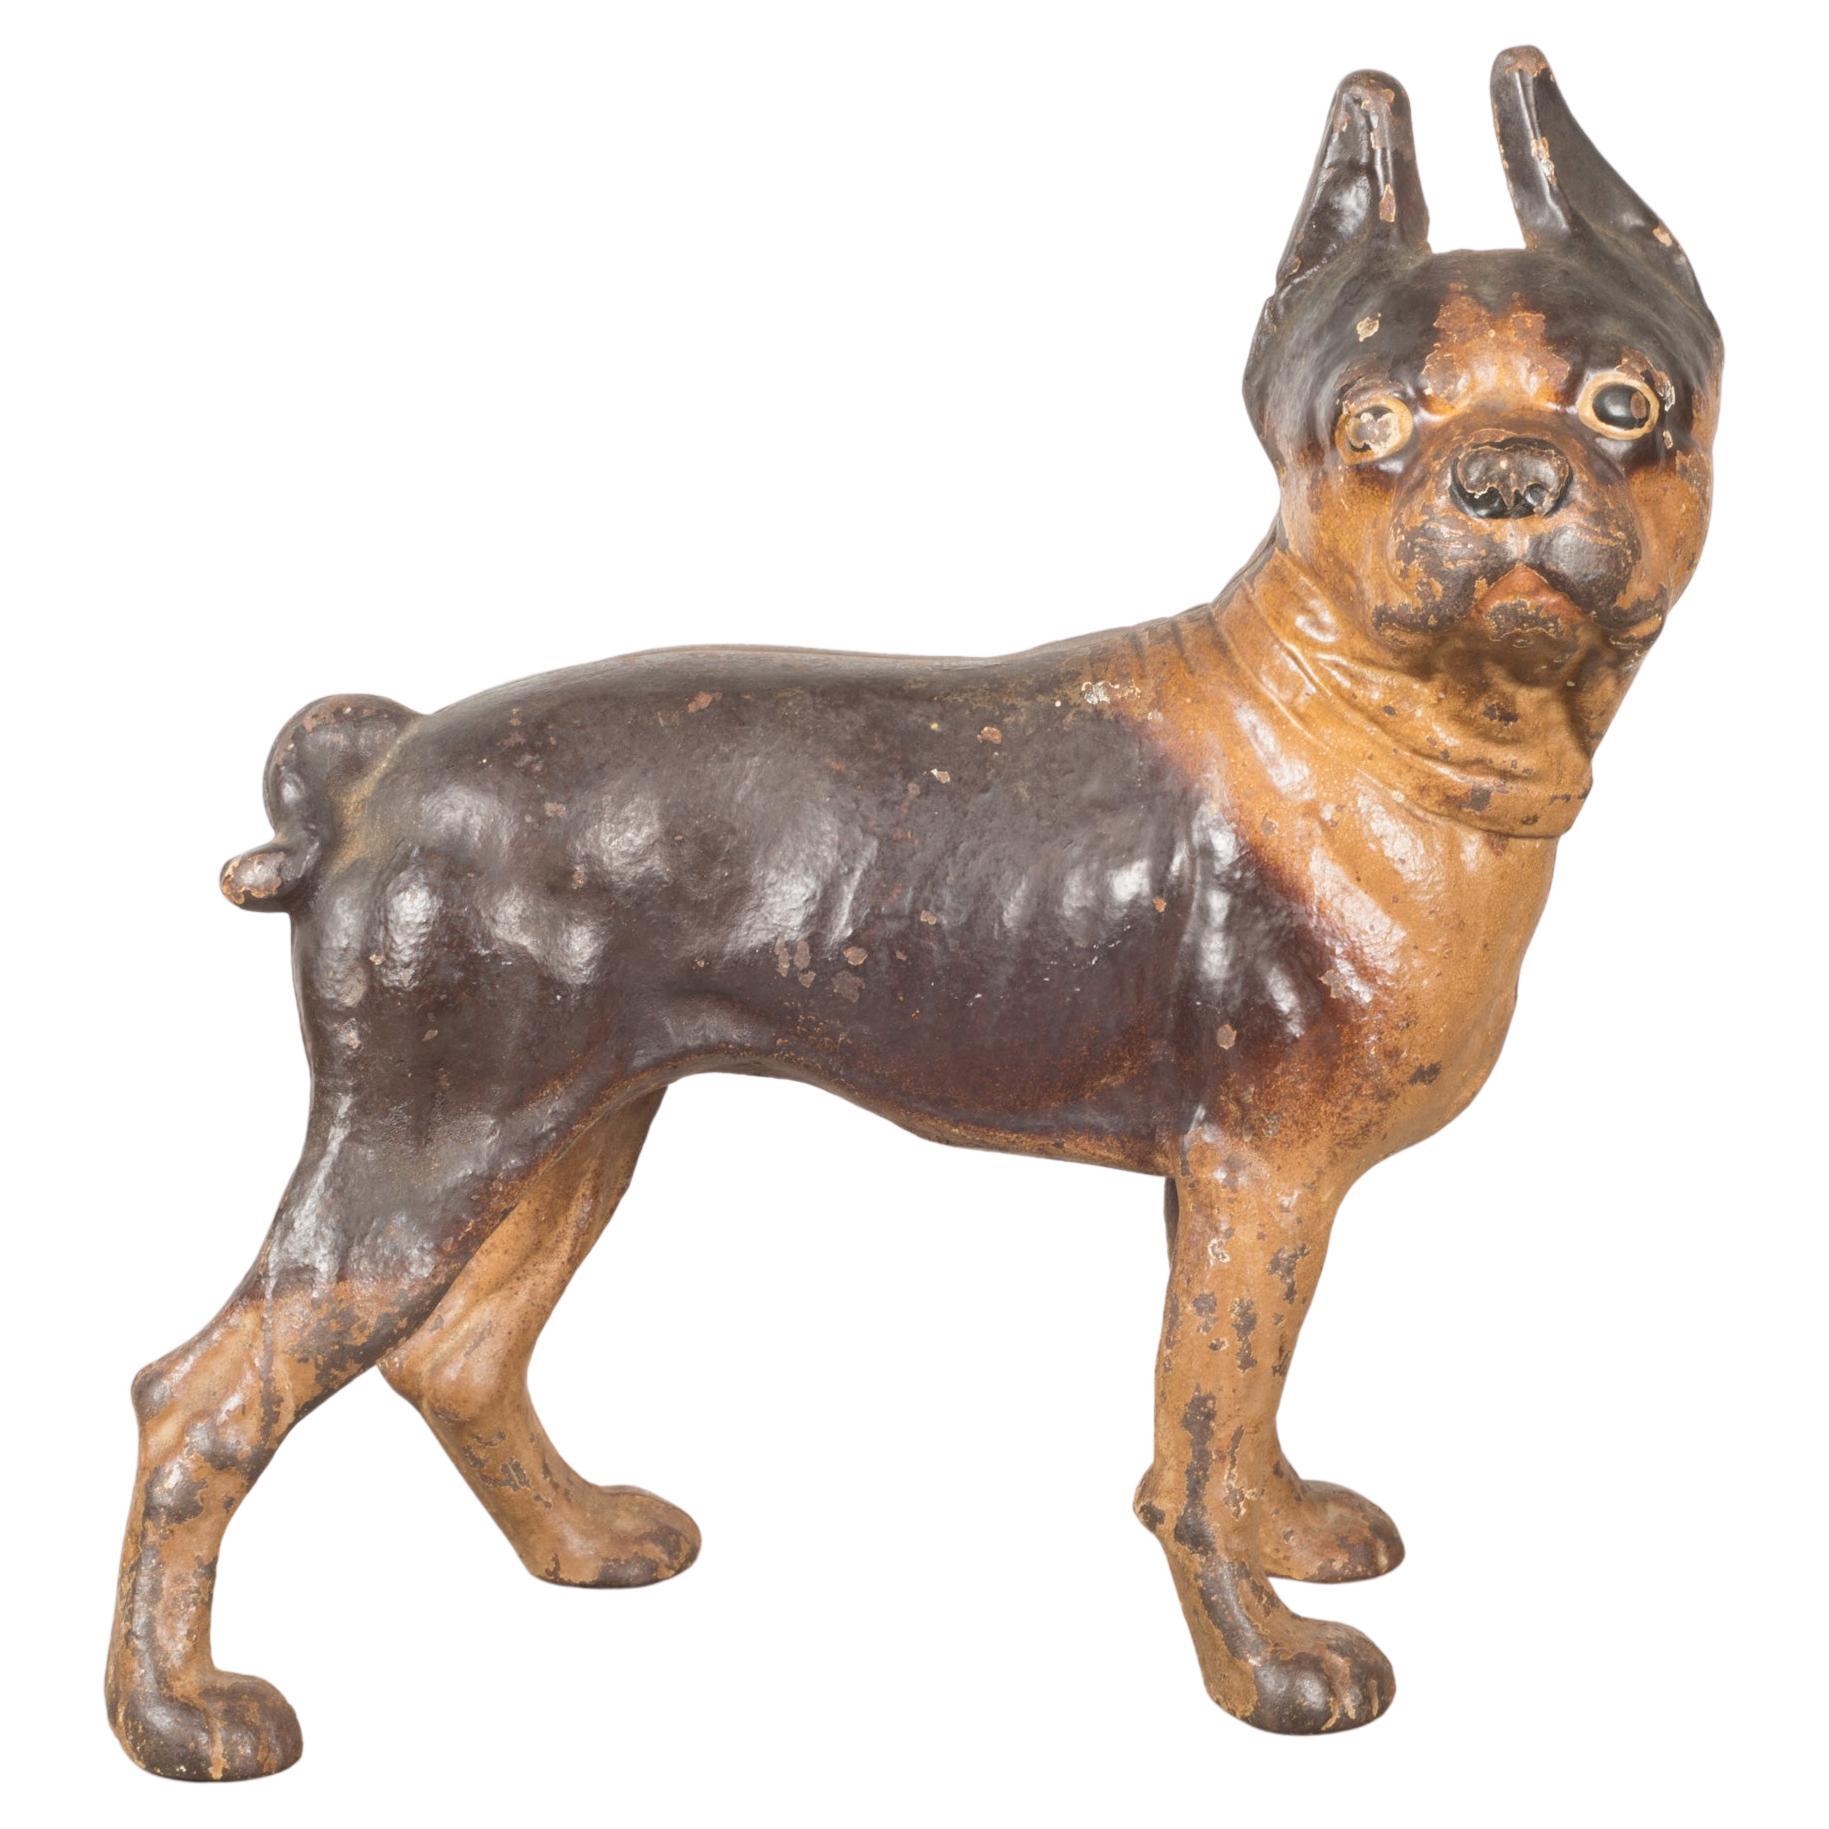 Cast Iron Boston Terrier Doorstop by Hubley, circa 1910-1940  (FREE SHIPPING)